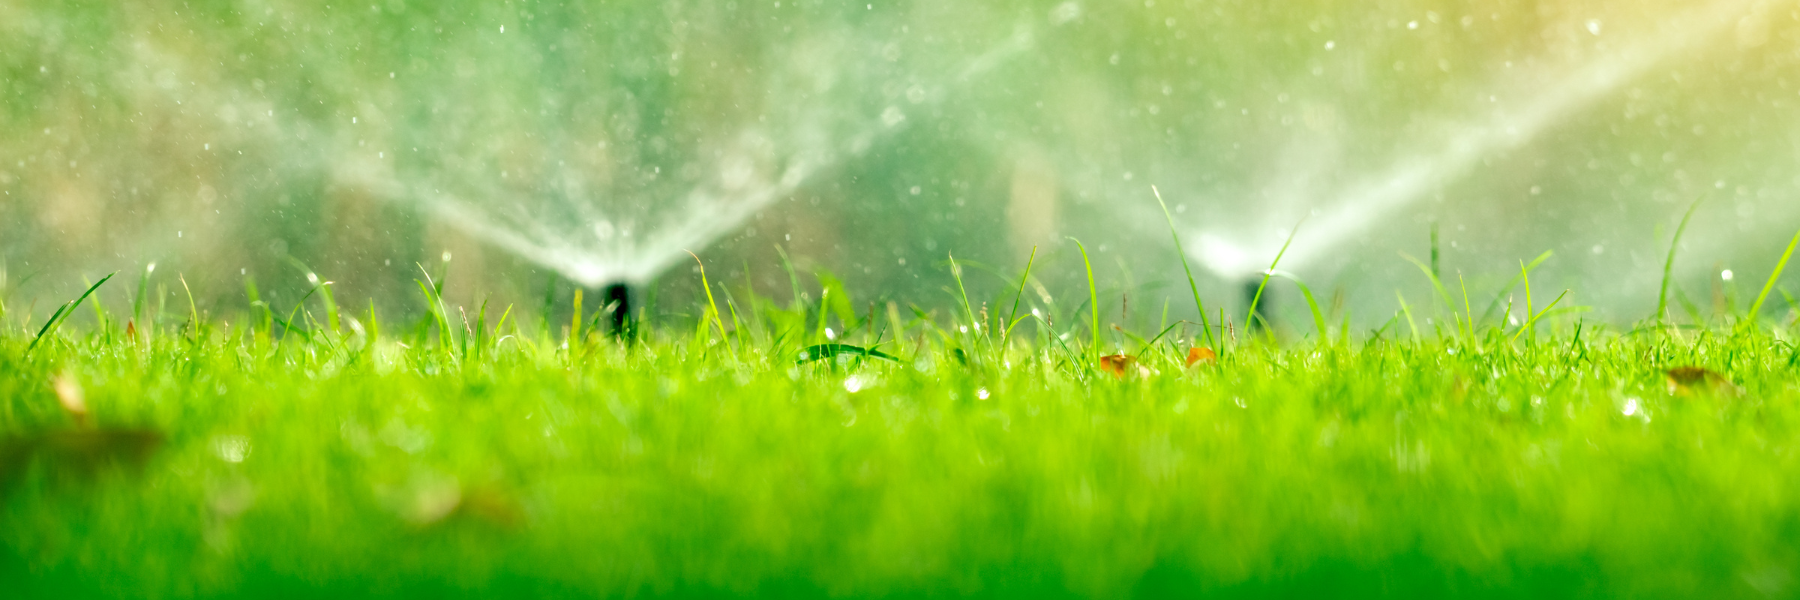 Grass with smart reticulation sprinklers